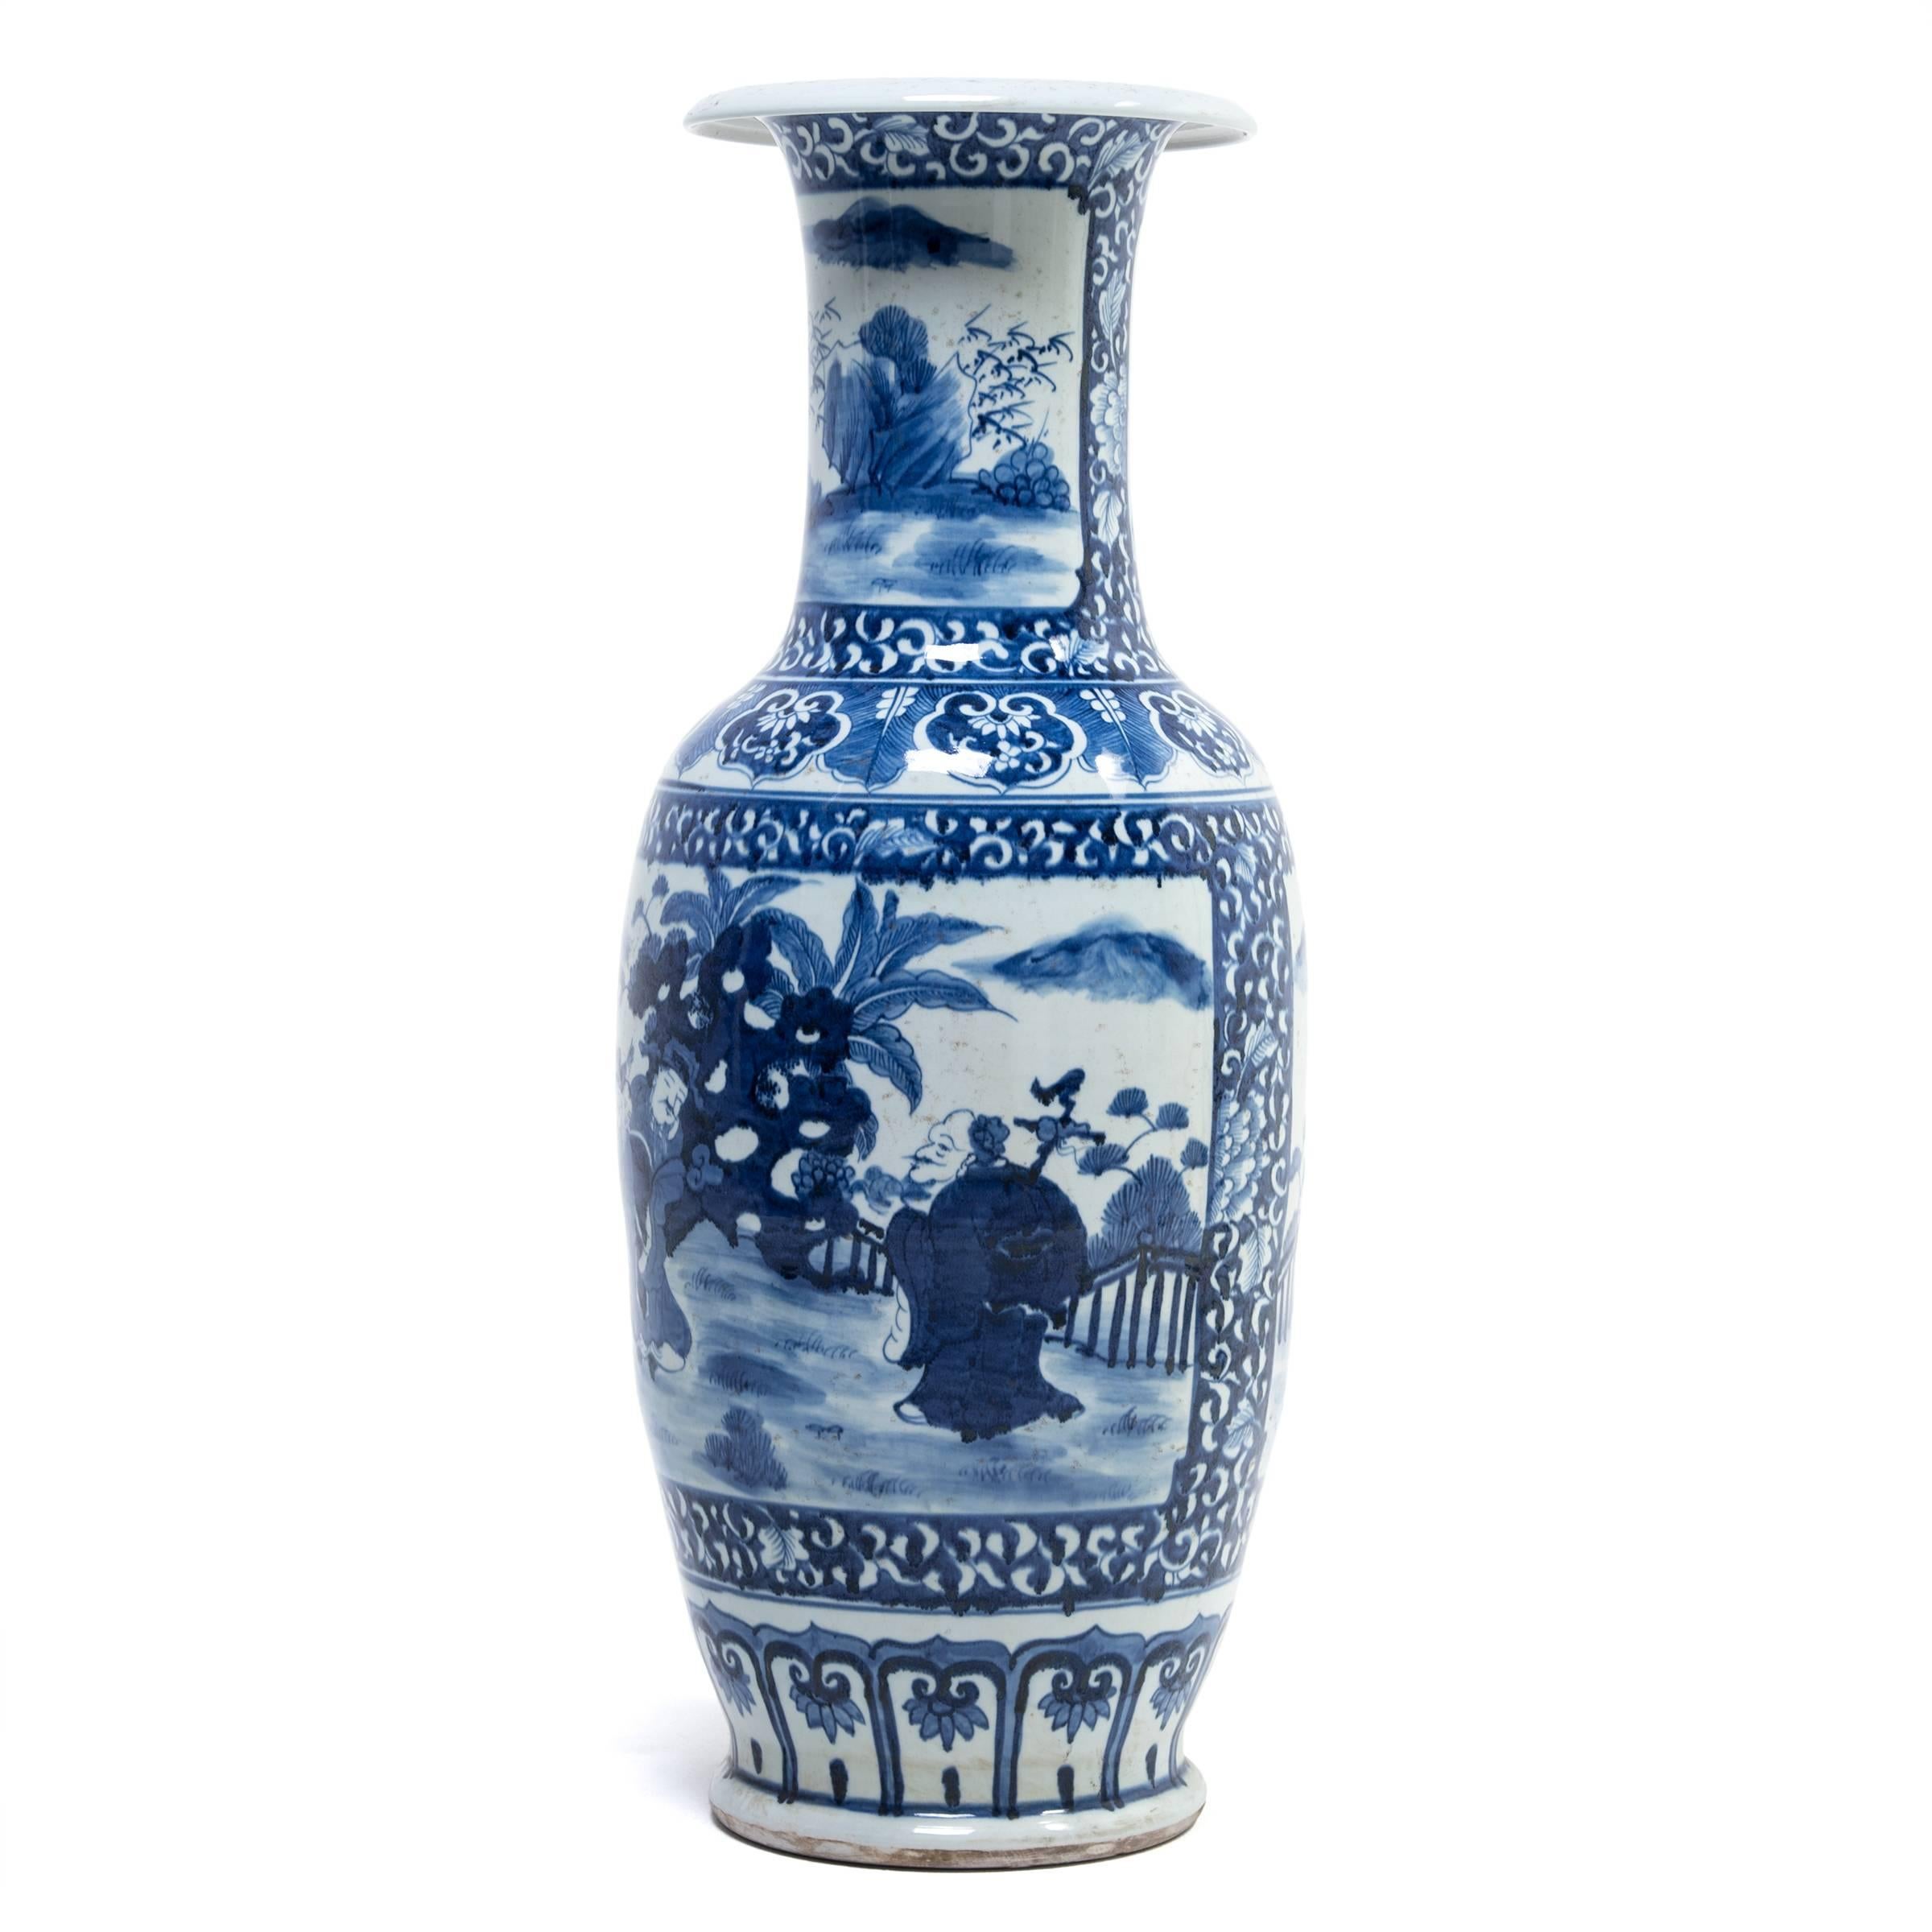 Chinese blue-and-white ceramics have inspired ceramists worldwide since cobalt was first introduced to China from the Middle East thousands of years ago. This contemporary vase from Jiangxi province assumes a traditional curved shape emulating the